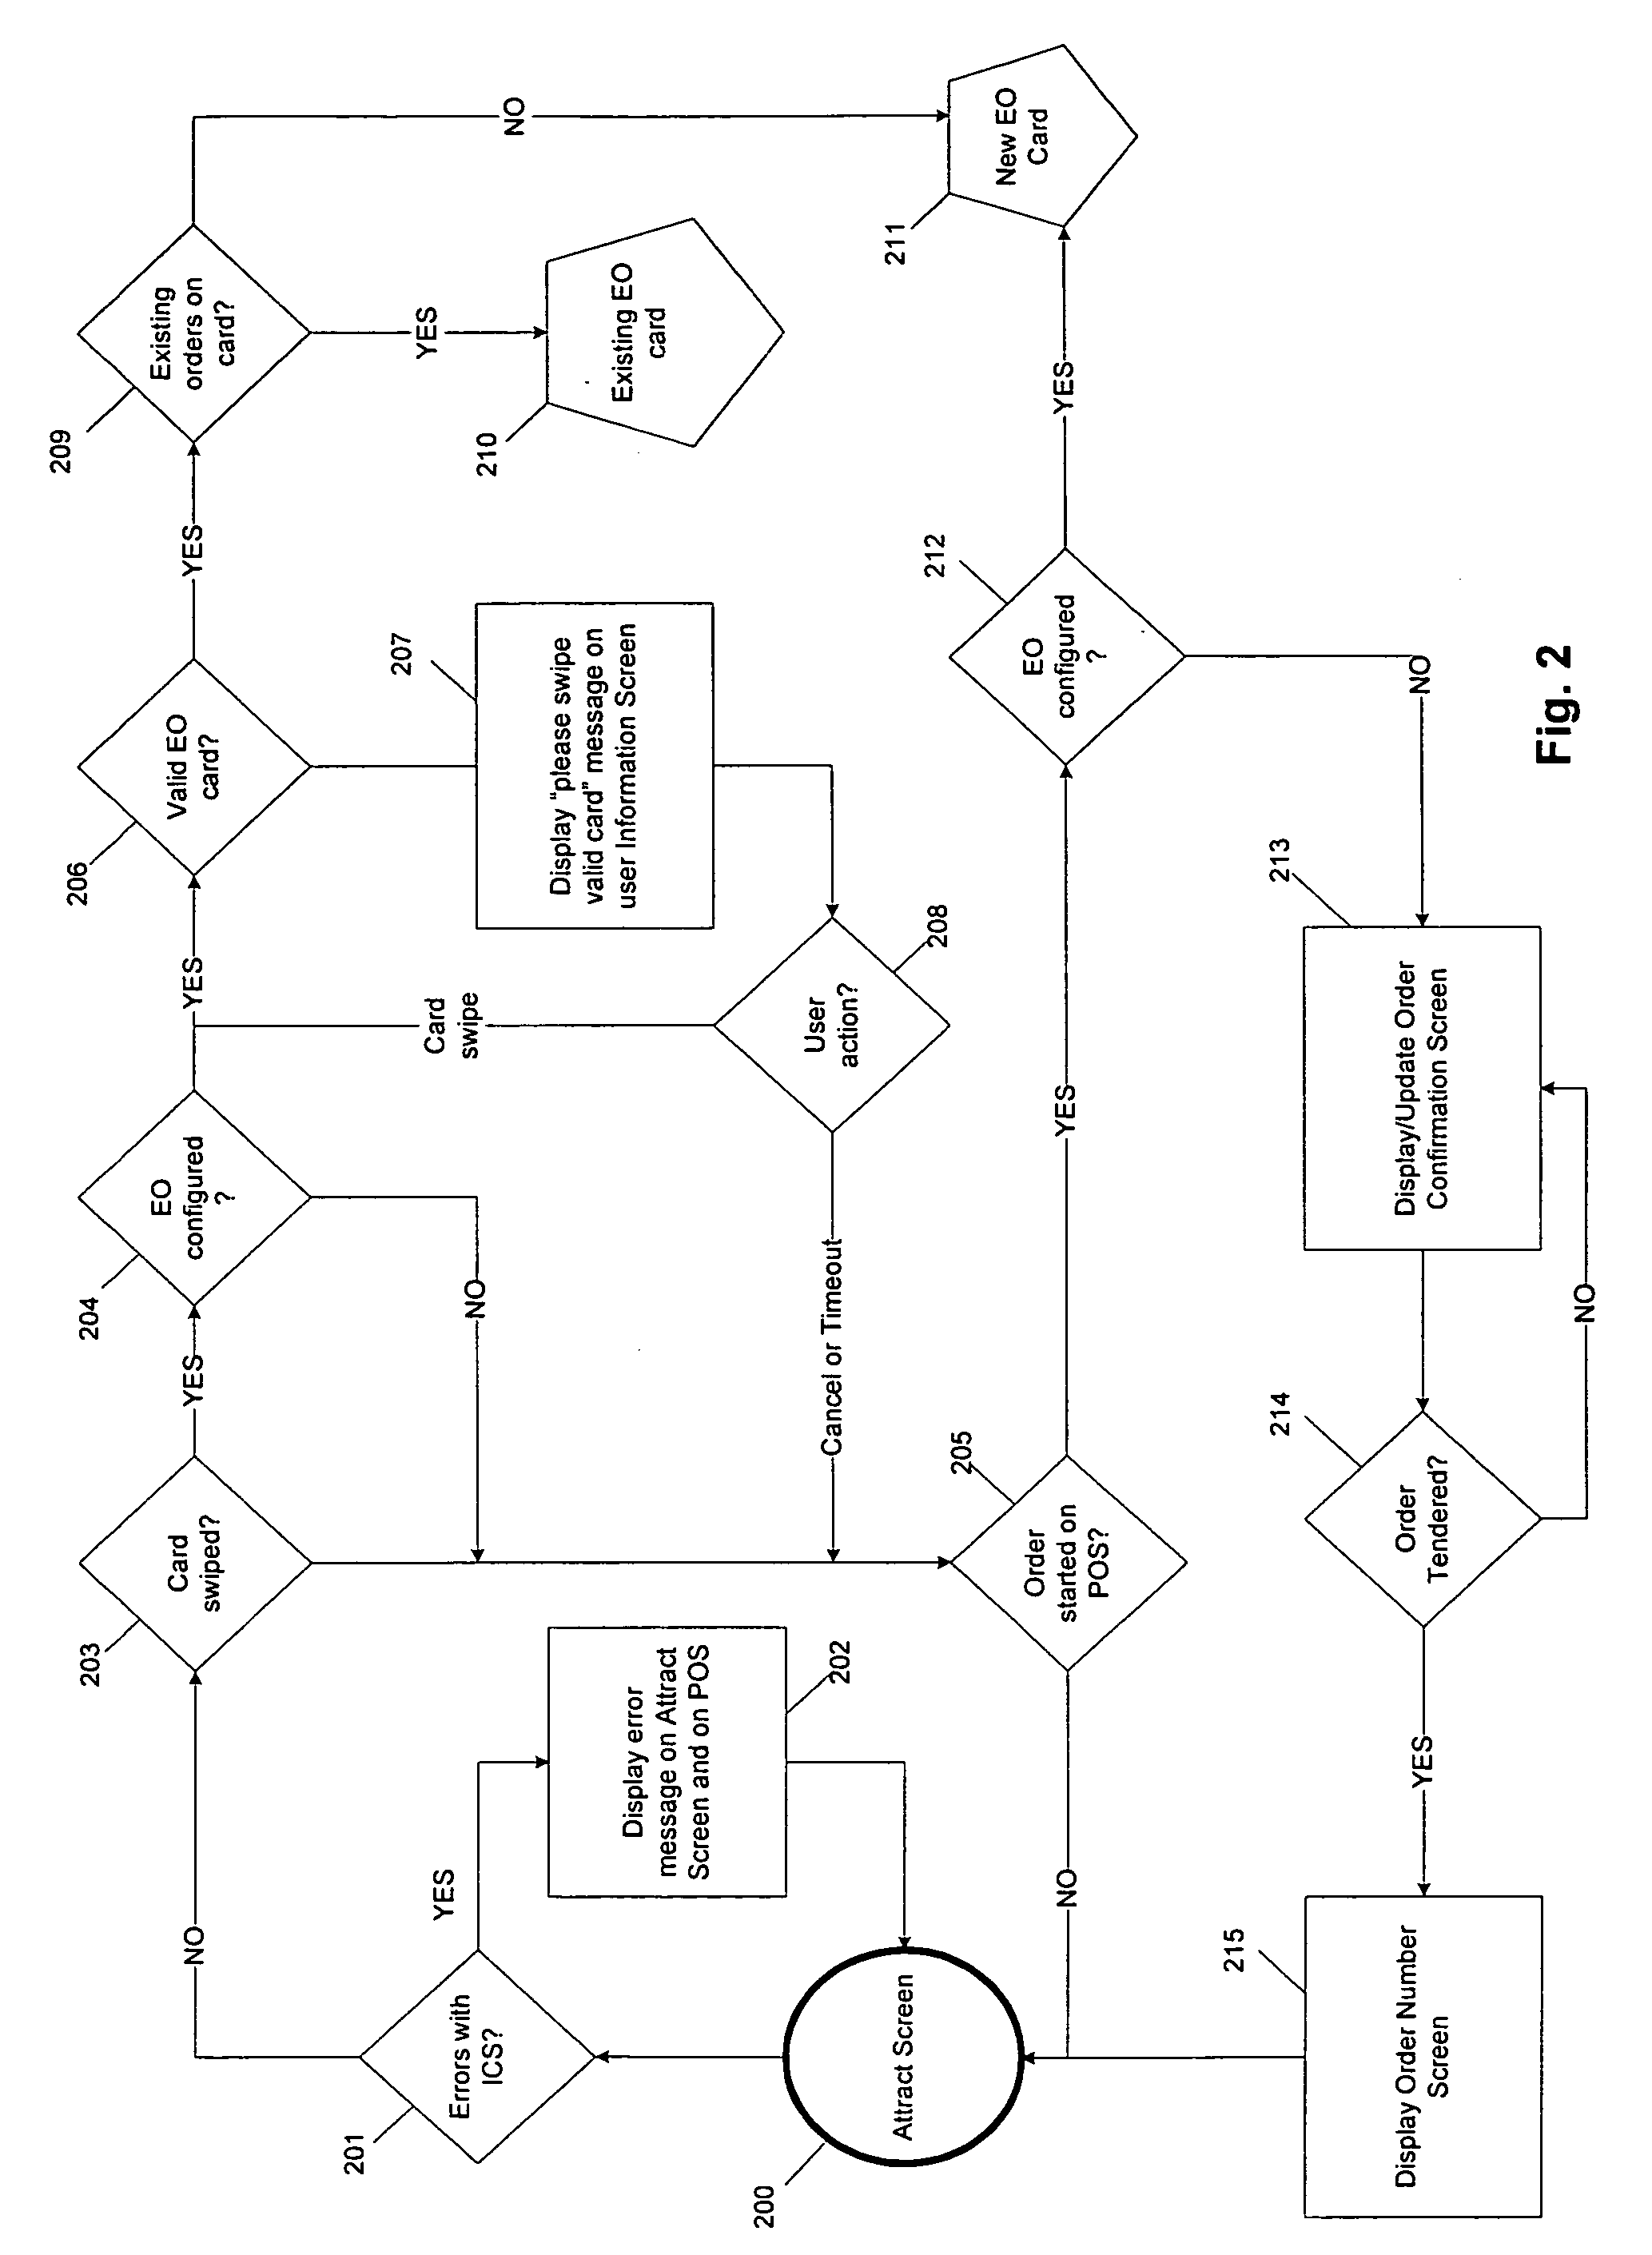 Interactive customer display system and method